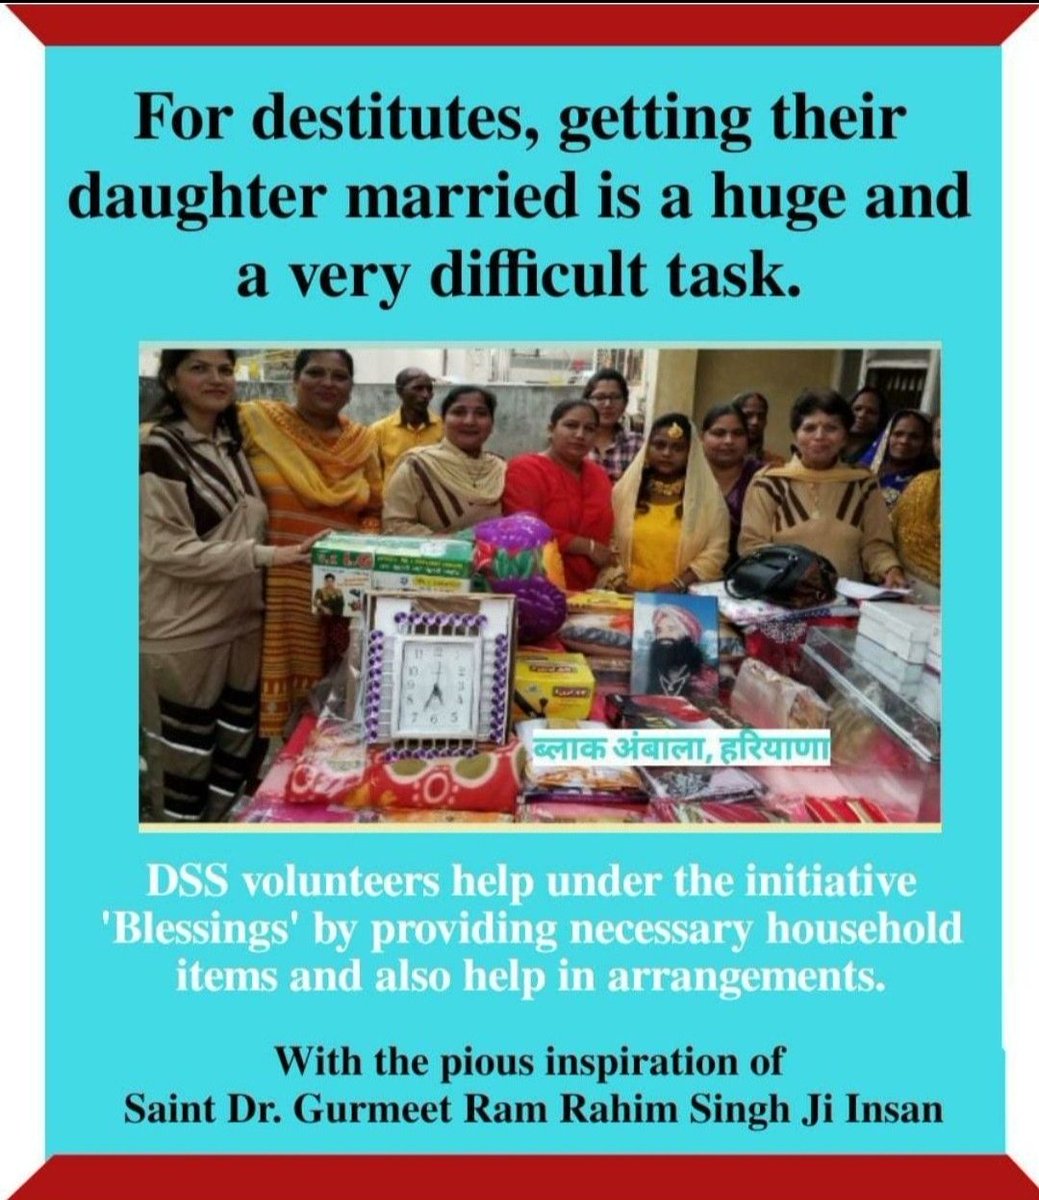 The volunteers of DSS take an initiative on the behalf of marriage girls by providing them every essential goods for his marriage and provide support to his parents with the inspiration of Saint Gurmeet Ram Rahim Ji
#Aashirwad